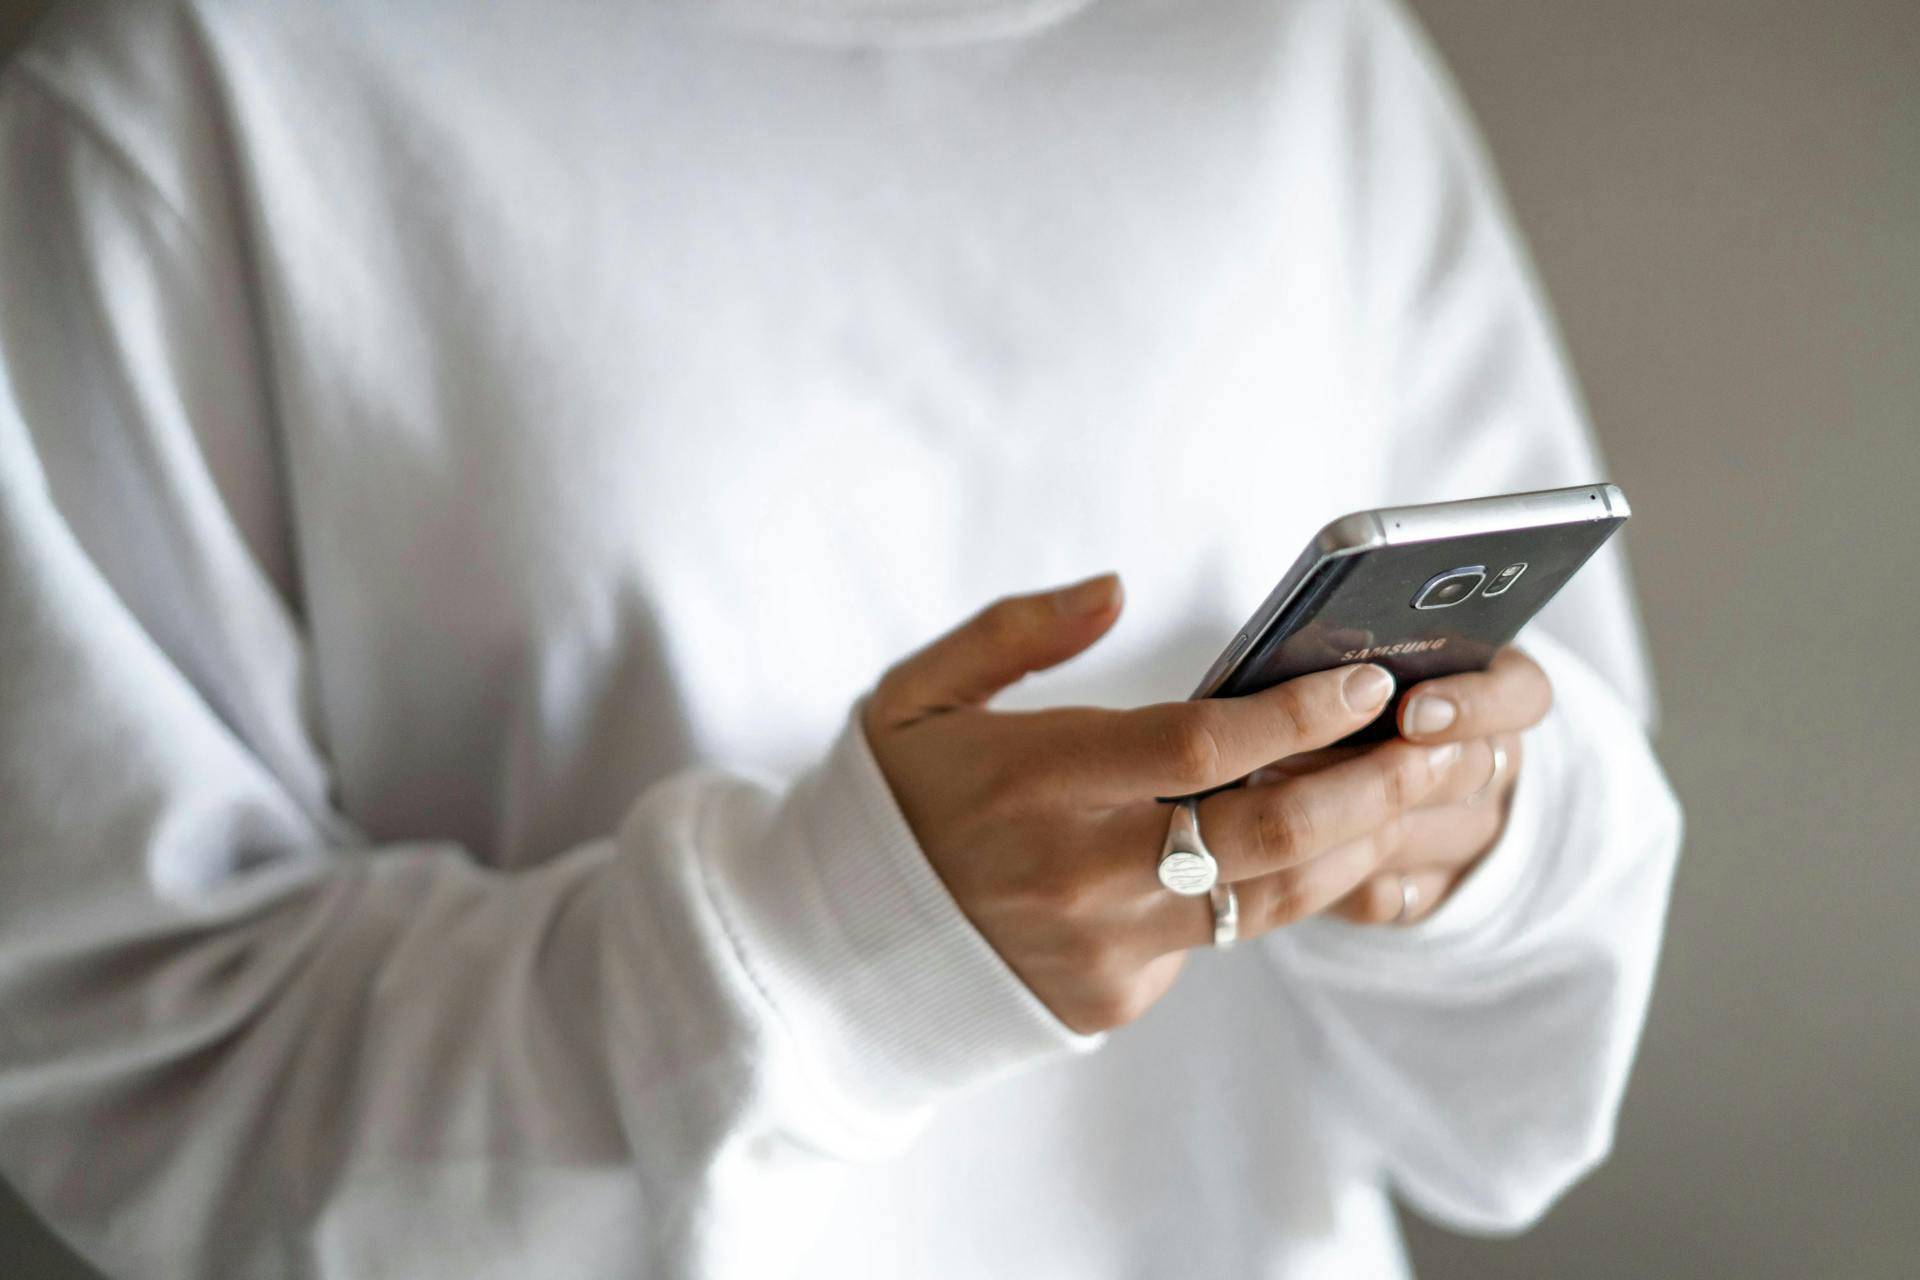 A person wearing a white long-sleeved shirt uses a Samsung smartphone, typing or browsing, in a neutral, dimly lit space.